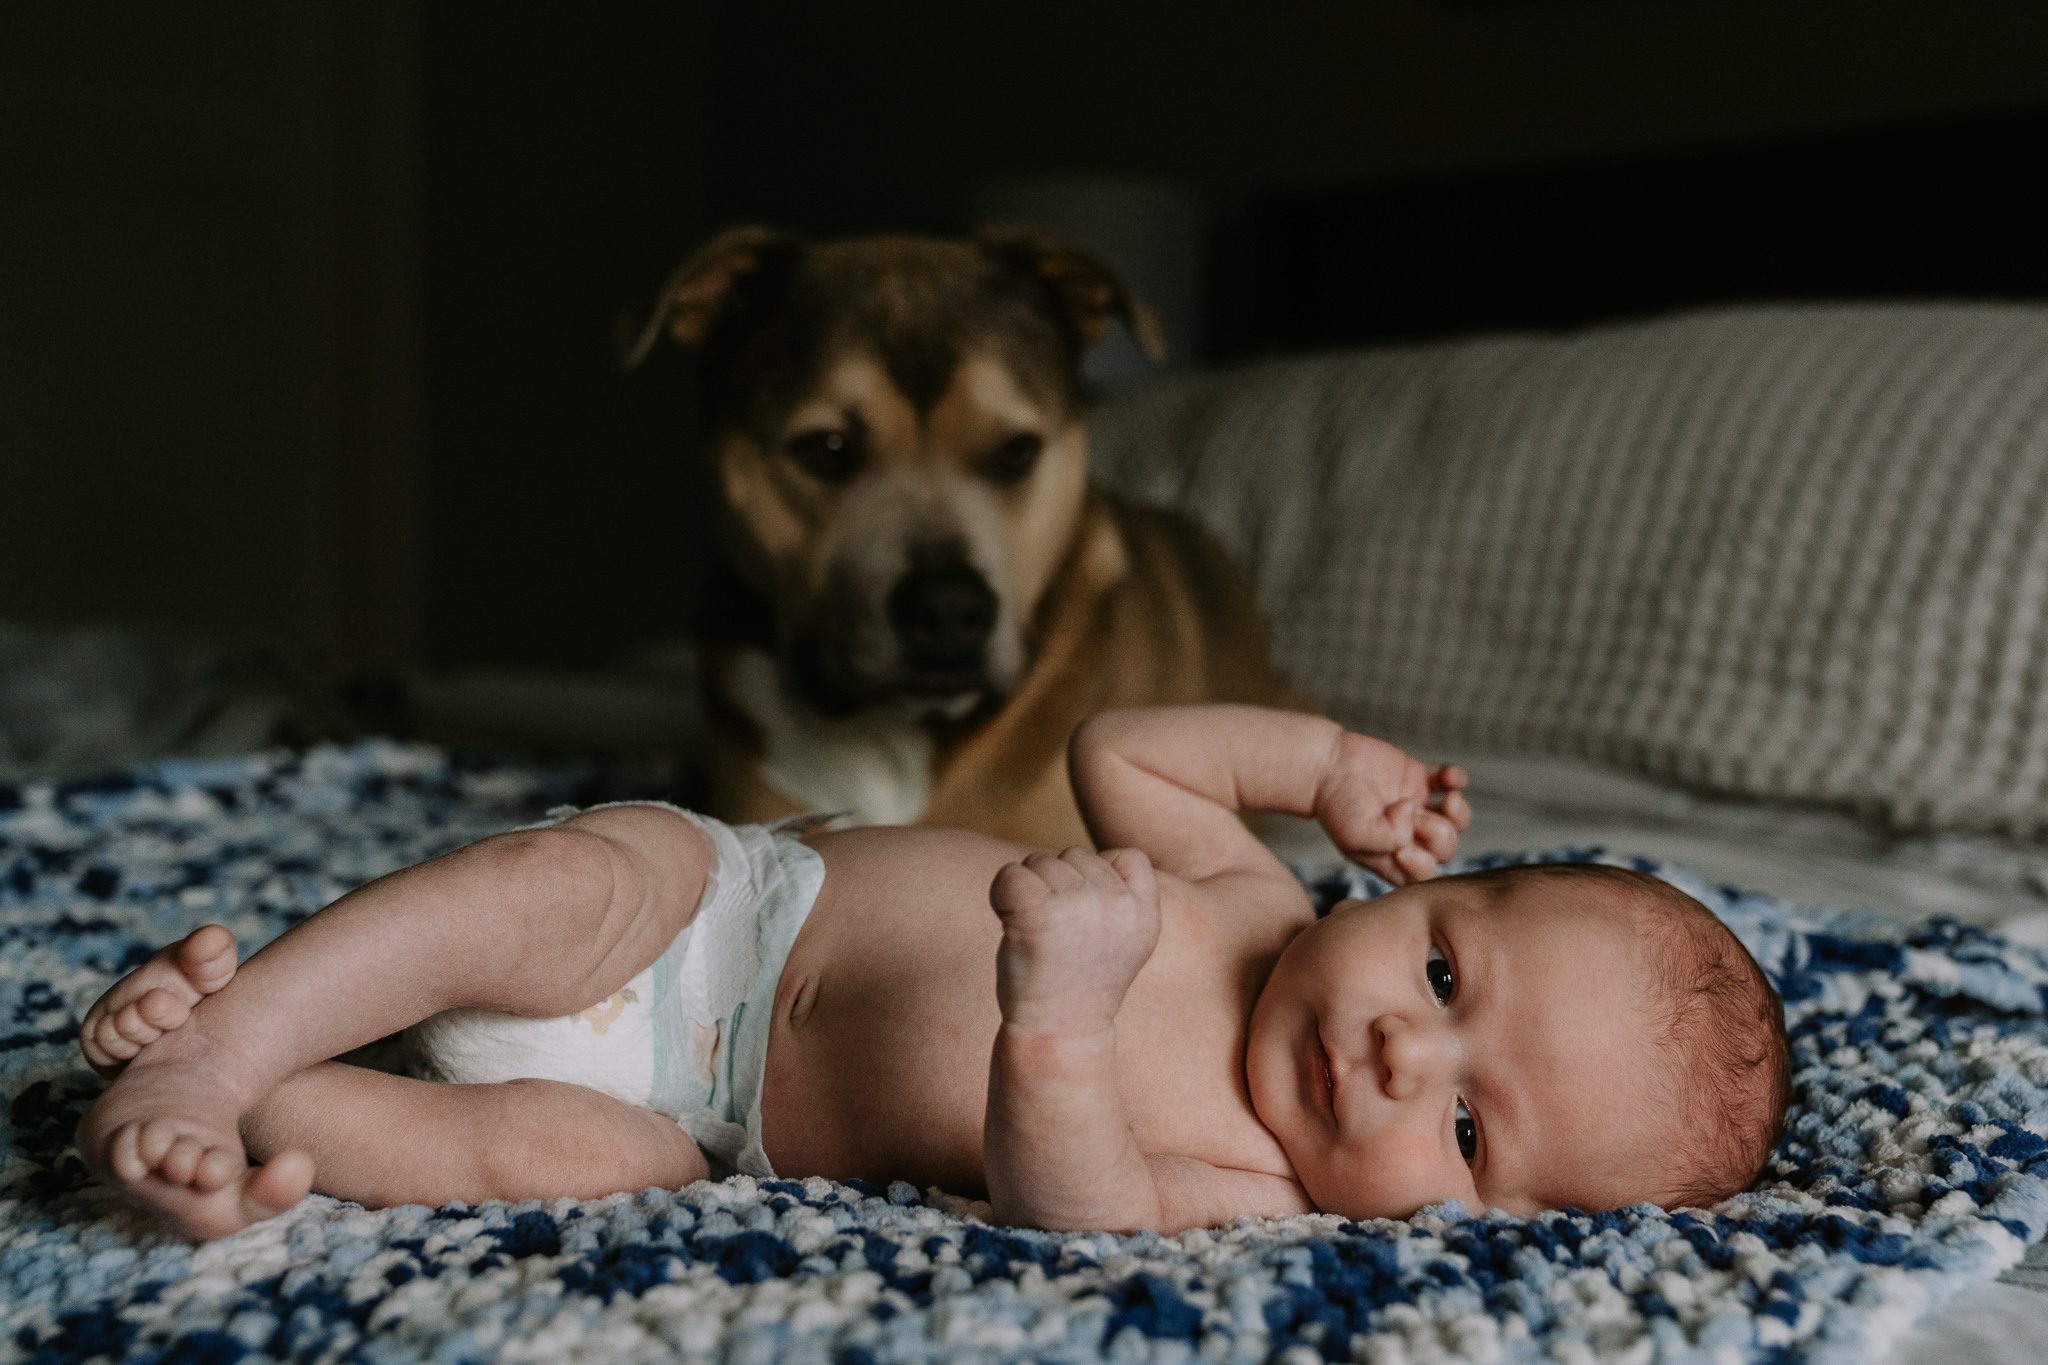 Family dog watches over new baby